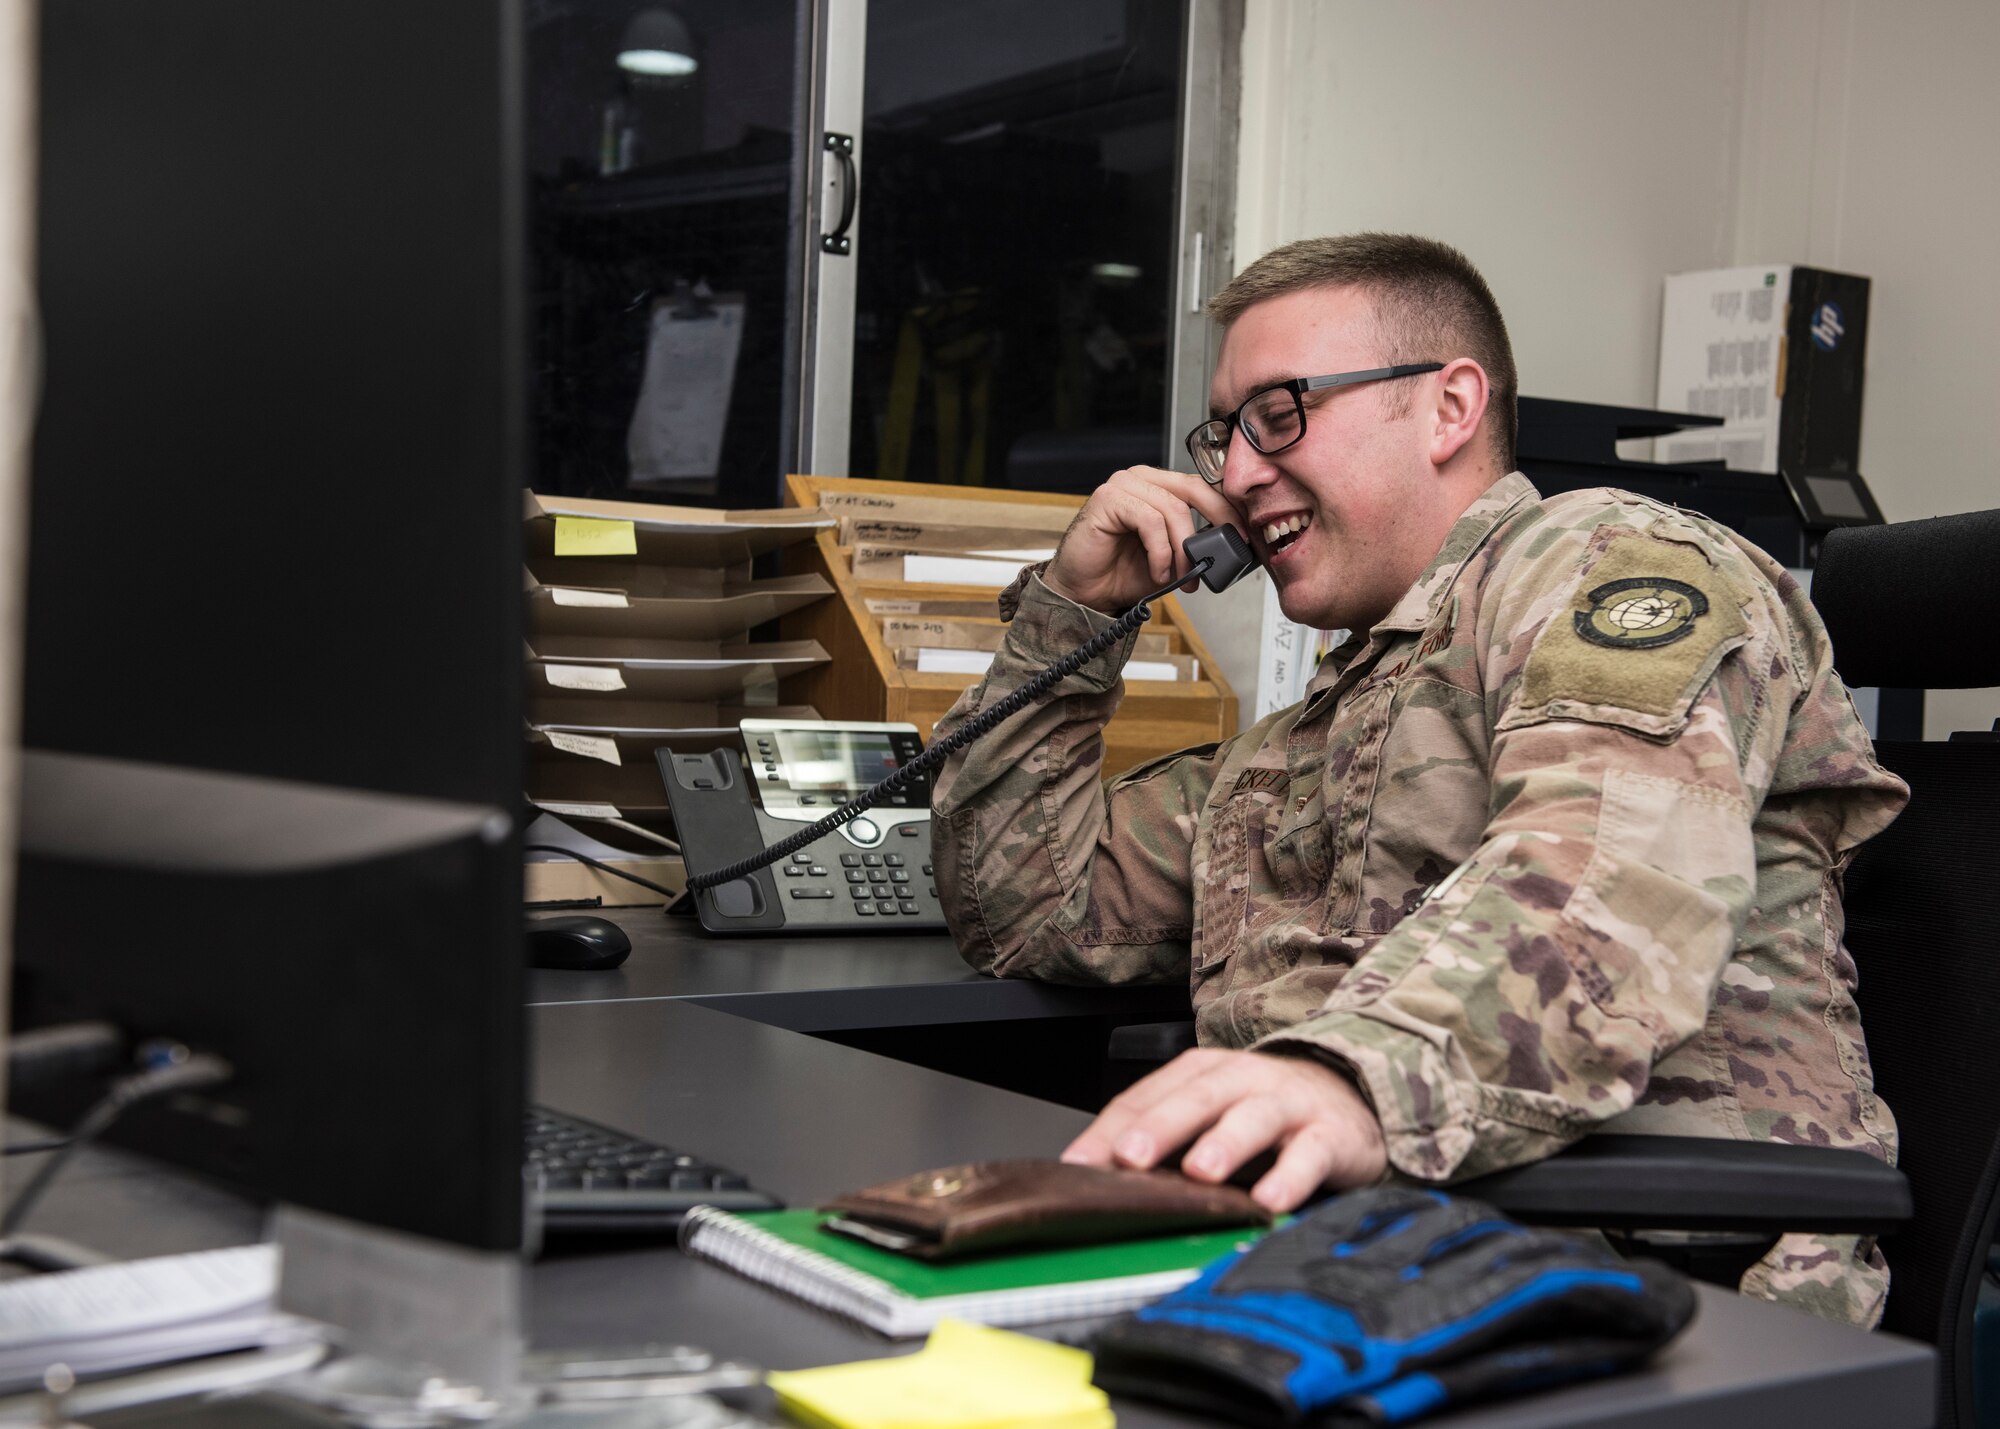 Senior Airman Trevor Bickett, 728th Air Mobility Squadron aircraft services journeyman discusses an operational requirement April 16, 2019, at Incirlik Air Base, Turkey. The 728th AMS maintains all transient and assigned aircraft while serving as the gateway to U.S. Air Forces Central Command. (U.S. Air Force photo by Staff Sgt. Kirby Turbak)